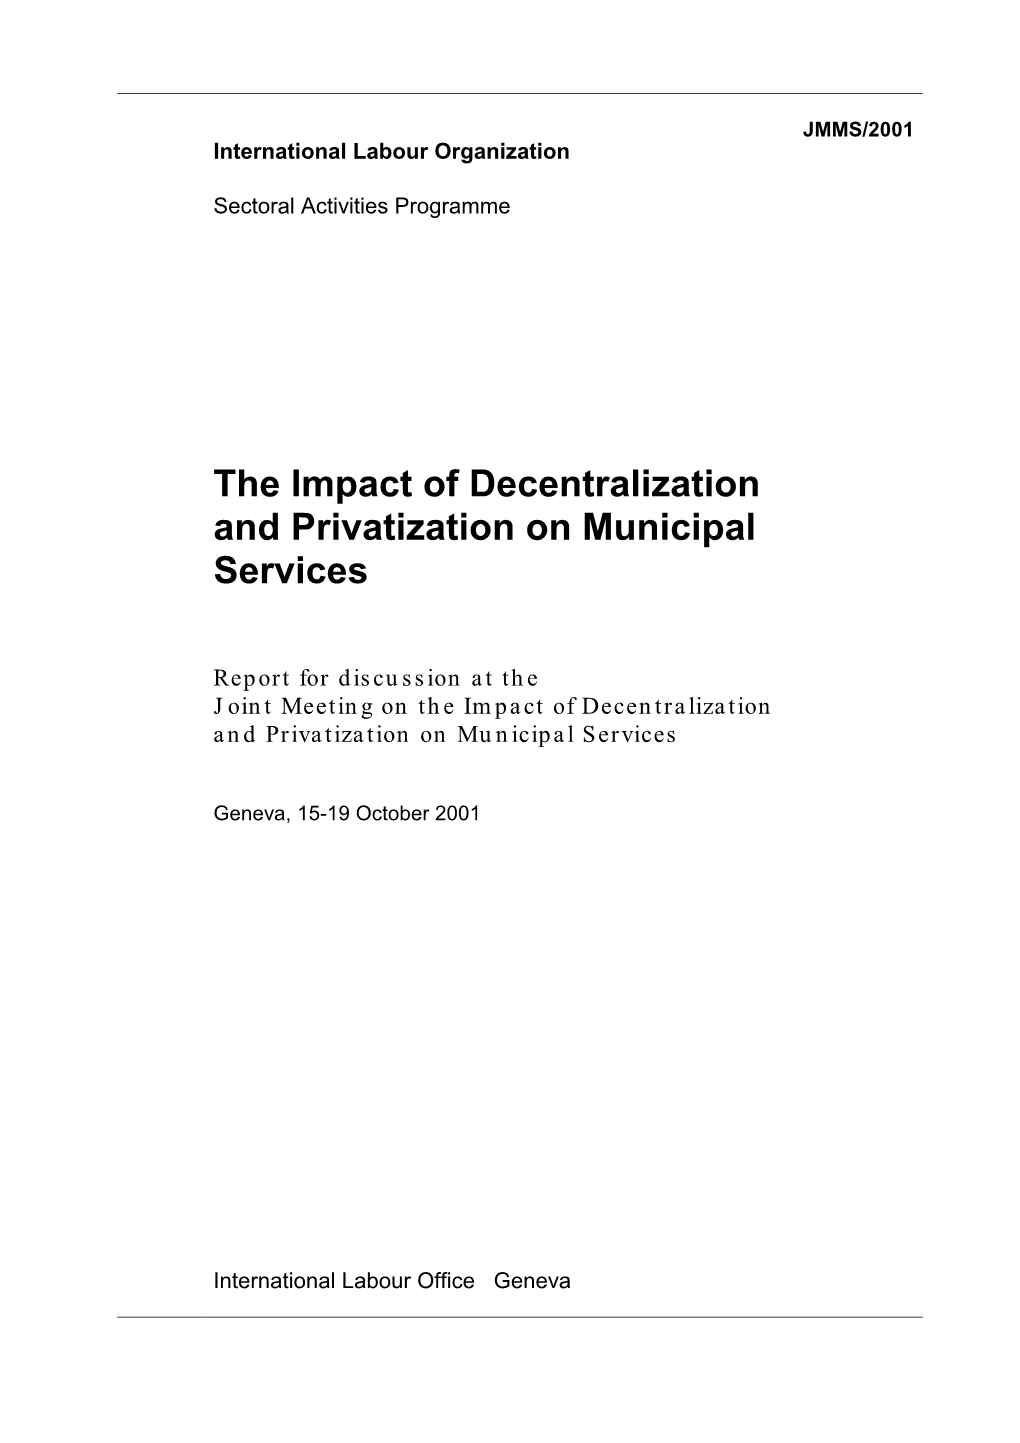 The Impact of Decentralization and Privatization on Municipal Services